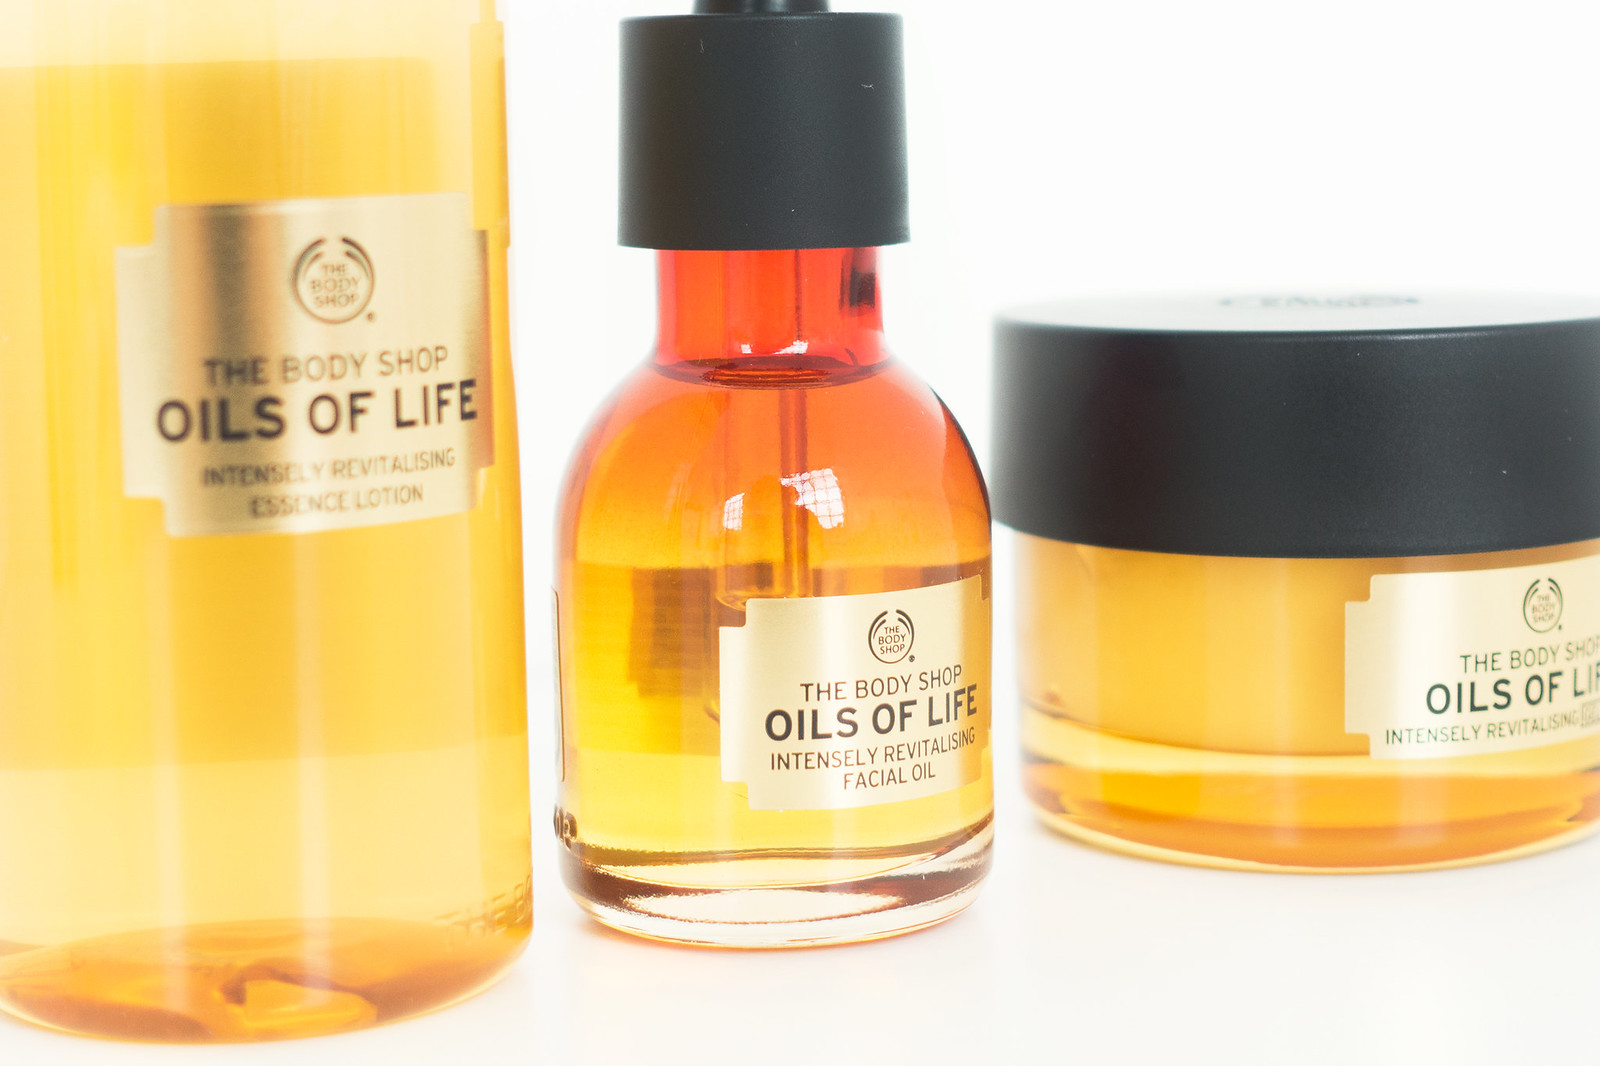 Products On Trial #4: First Impressions - The Body Shop Oils of Life